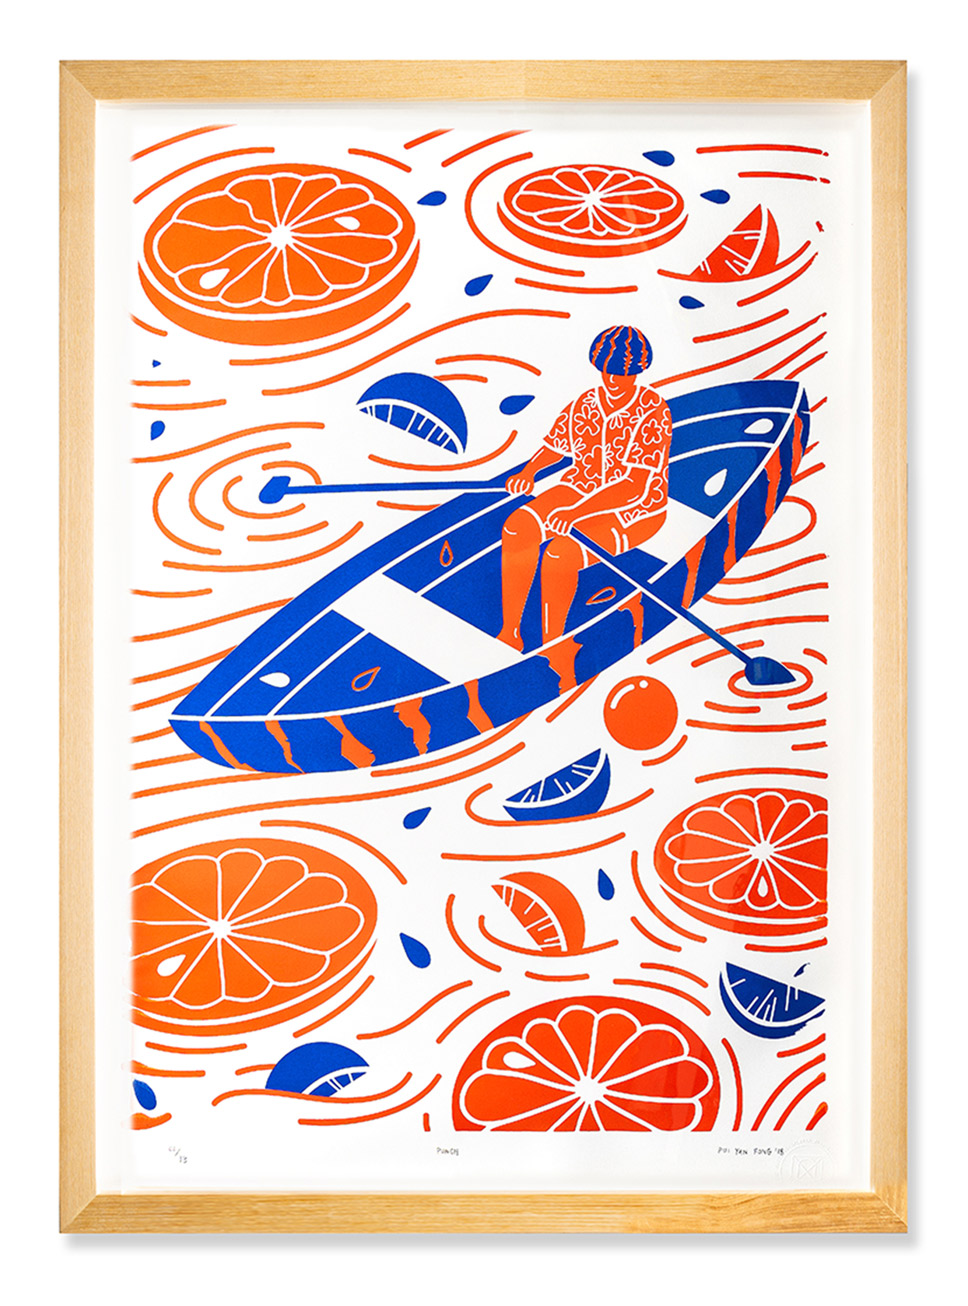 Gently rowing a boat in fruit punch